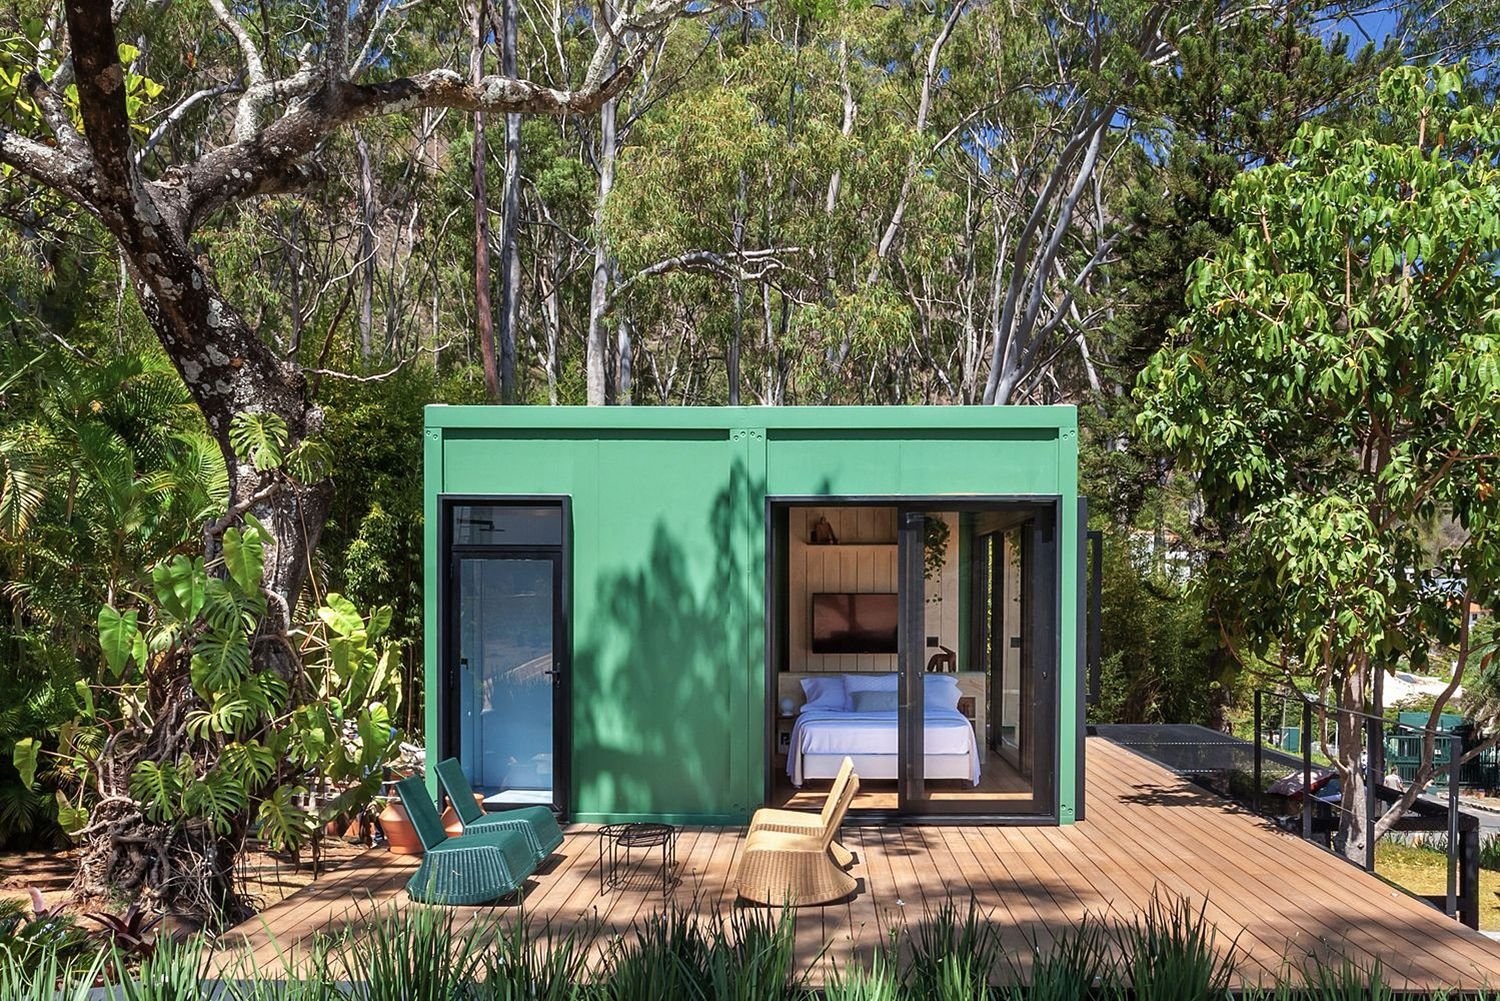 Vibrant Modular Micro-Dwelling Made With Shipping Containers